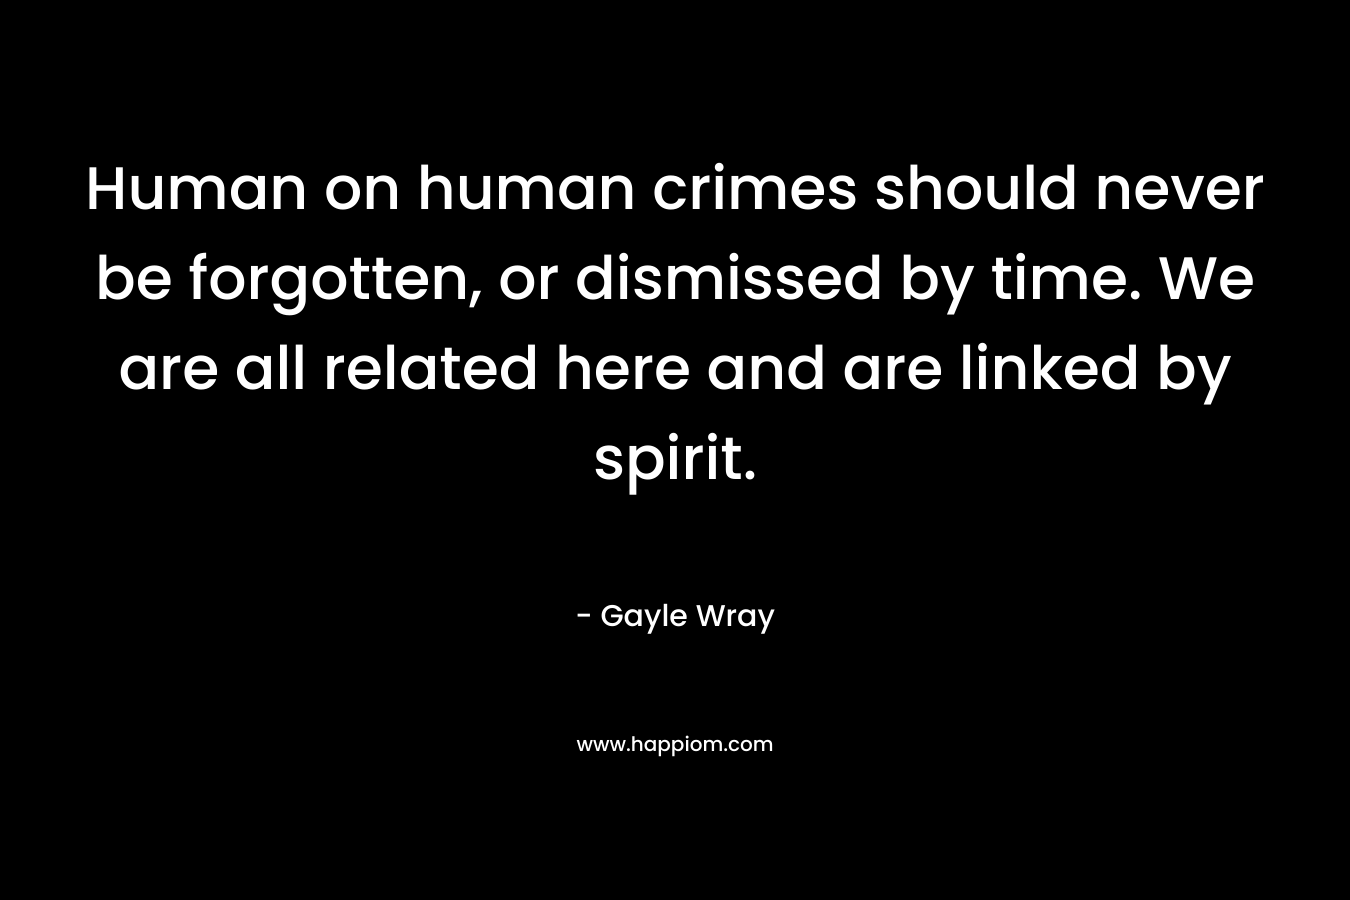 Human on human crimes should never be forgotten, or dismissed by time. We are all related here and are linked by spirit. – Gayle Wray